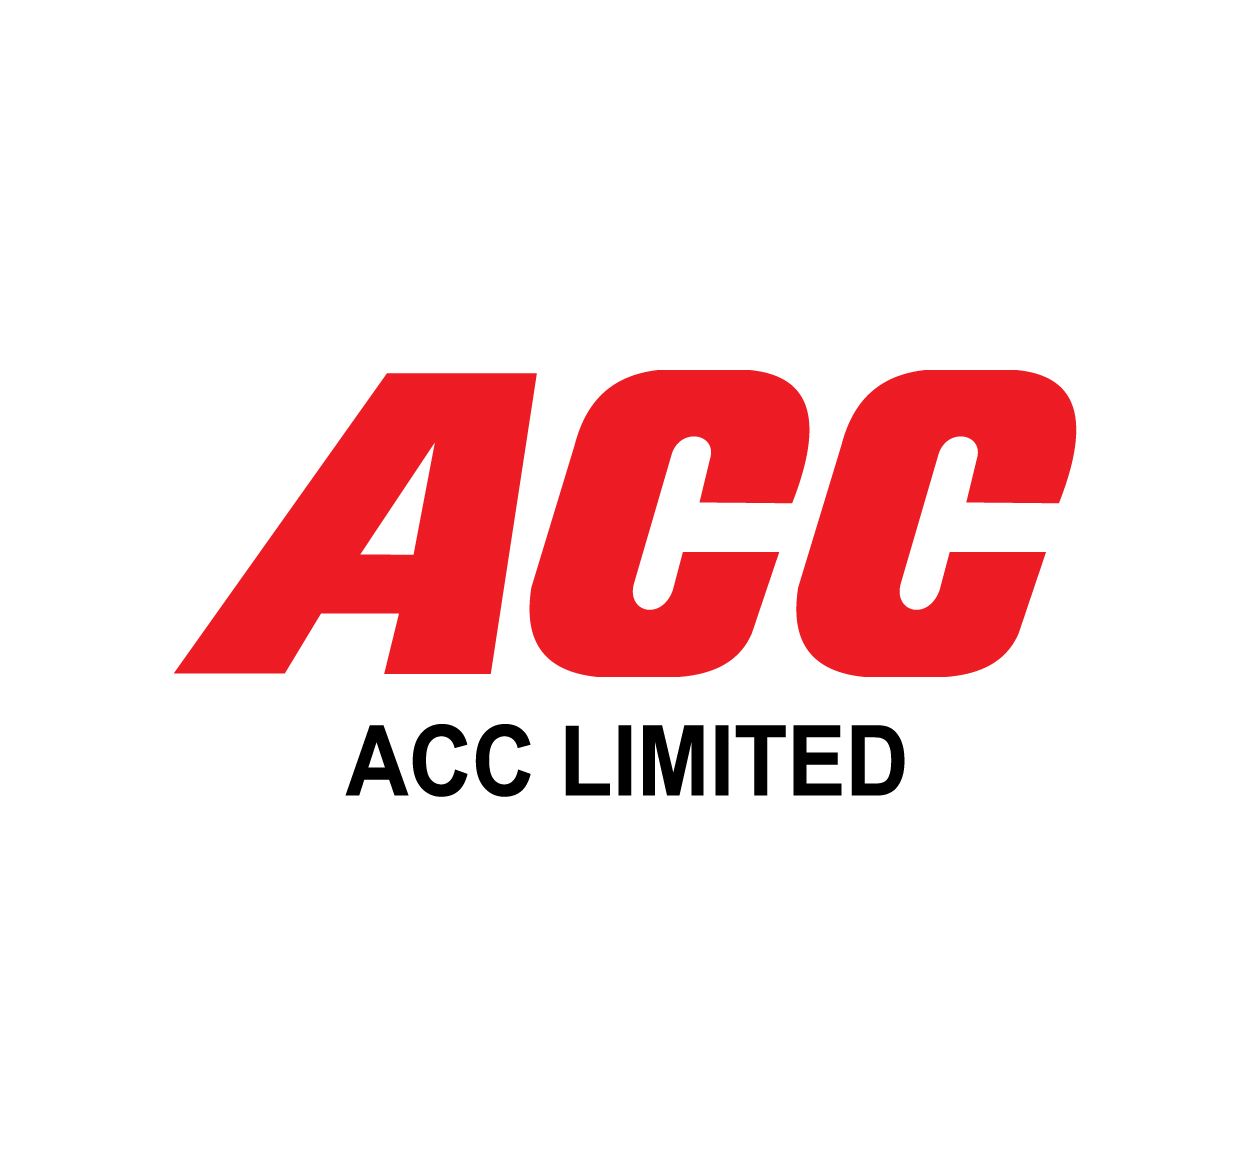 ACC Limited Records Cement Volume Growth of 4%